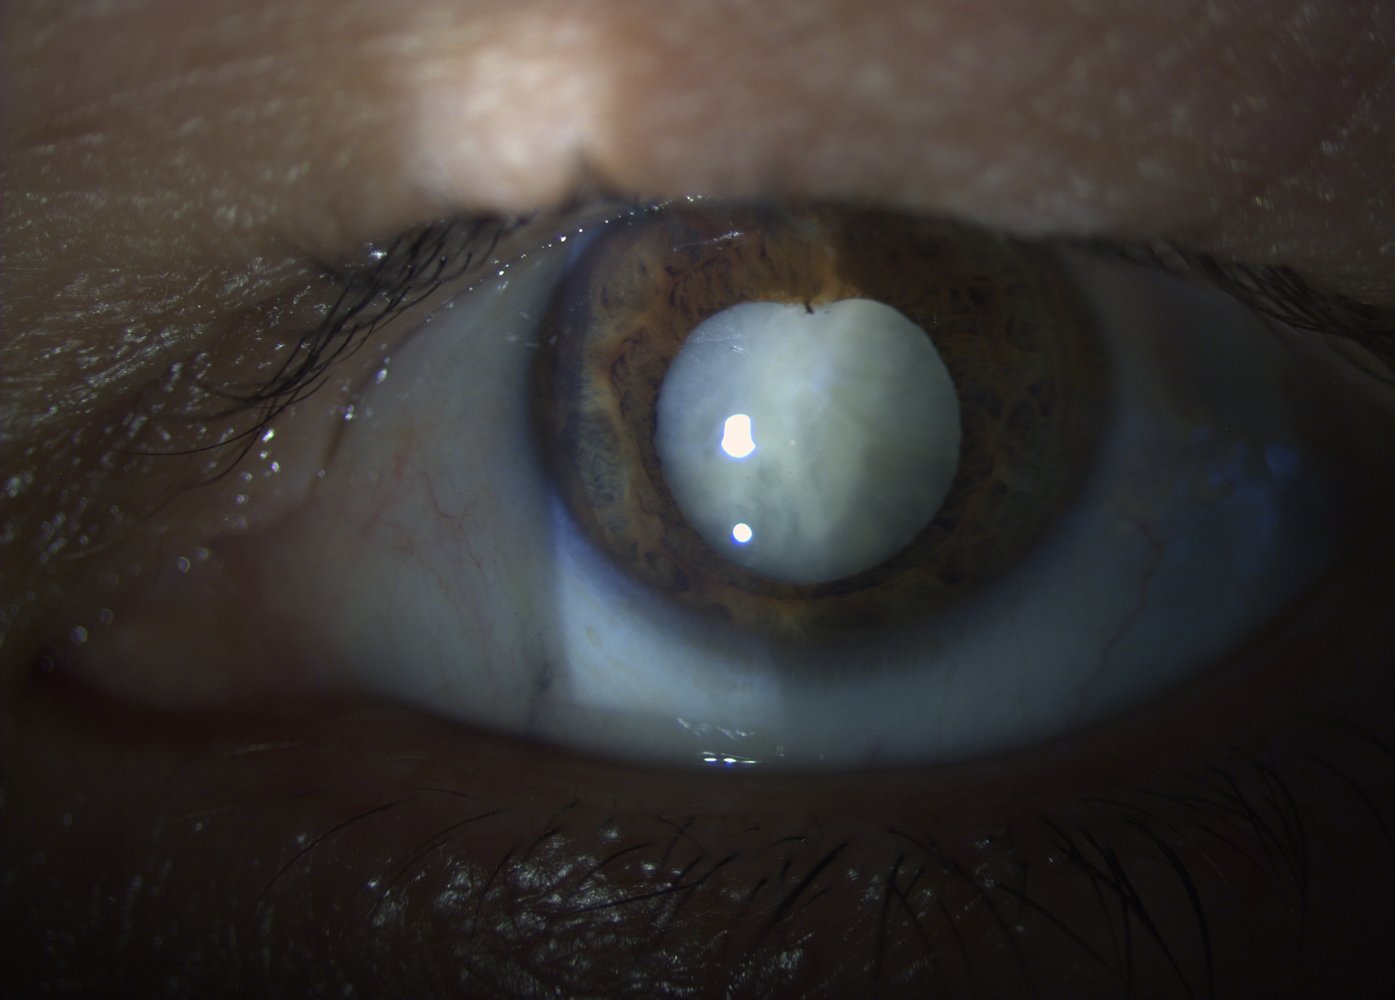 Stellate Cataract Detailed Guide On This Cataract